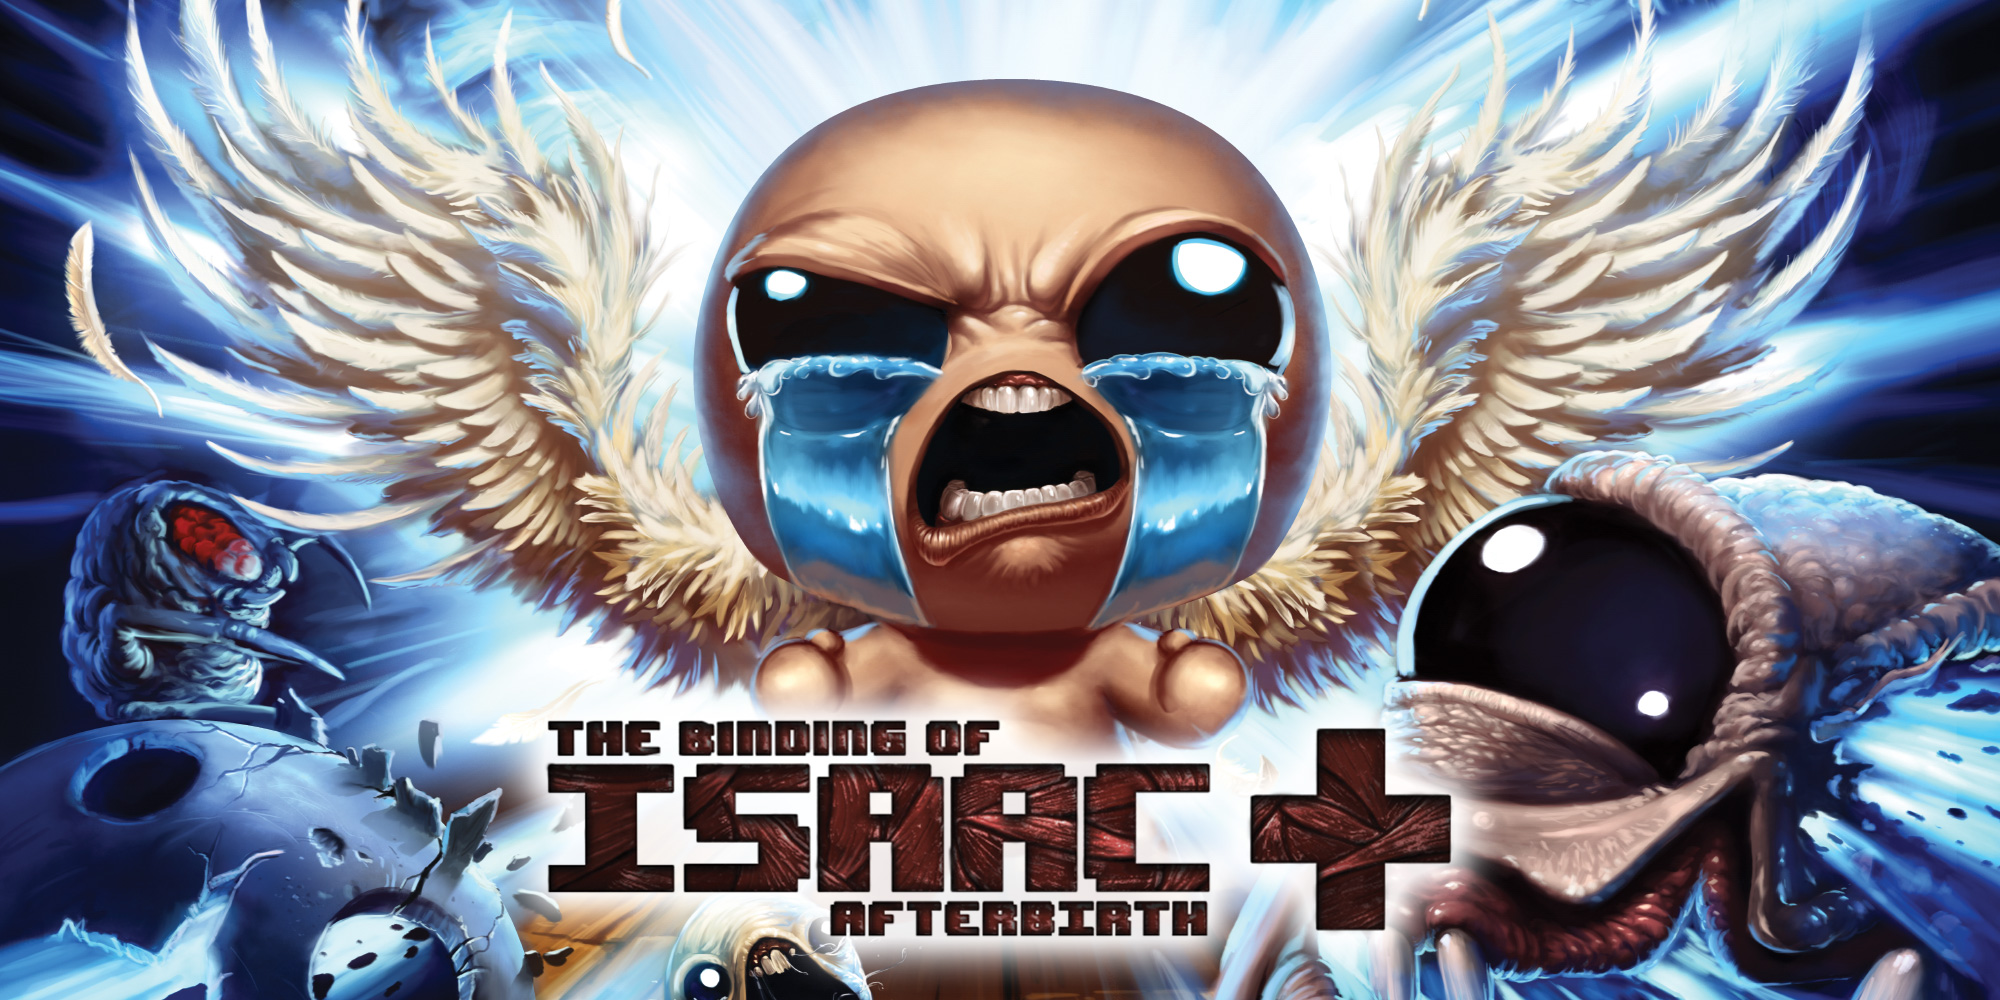 the binding of isaac online full game